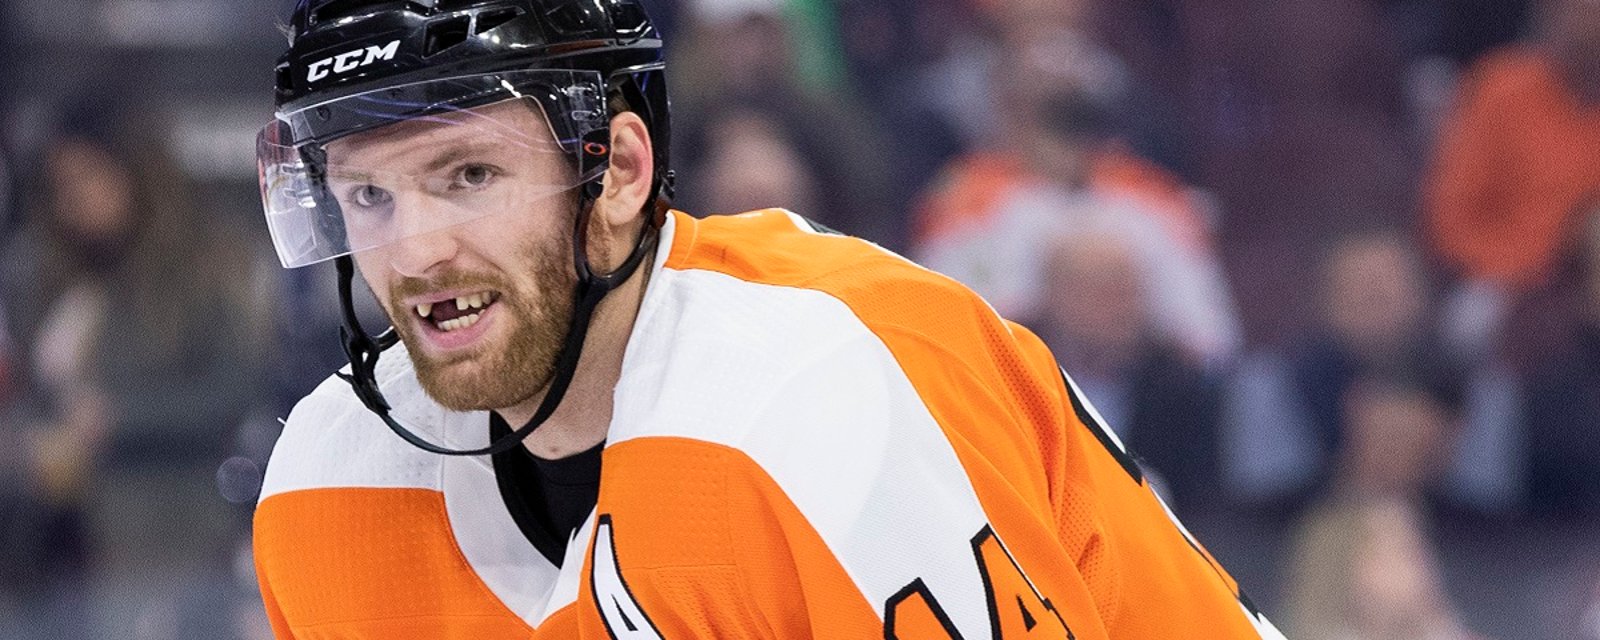 Couturier snaps after “missed” call from NHL officials.